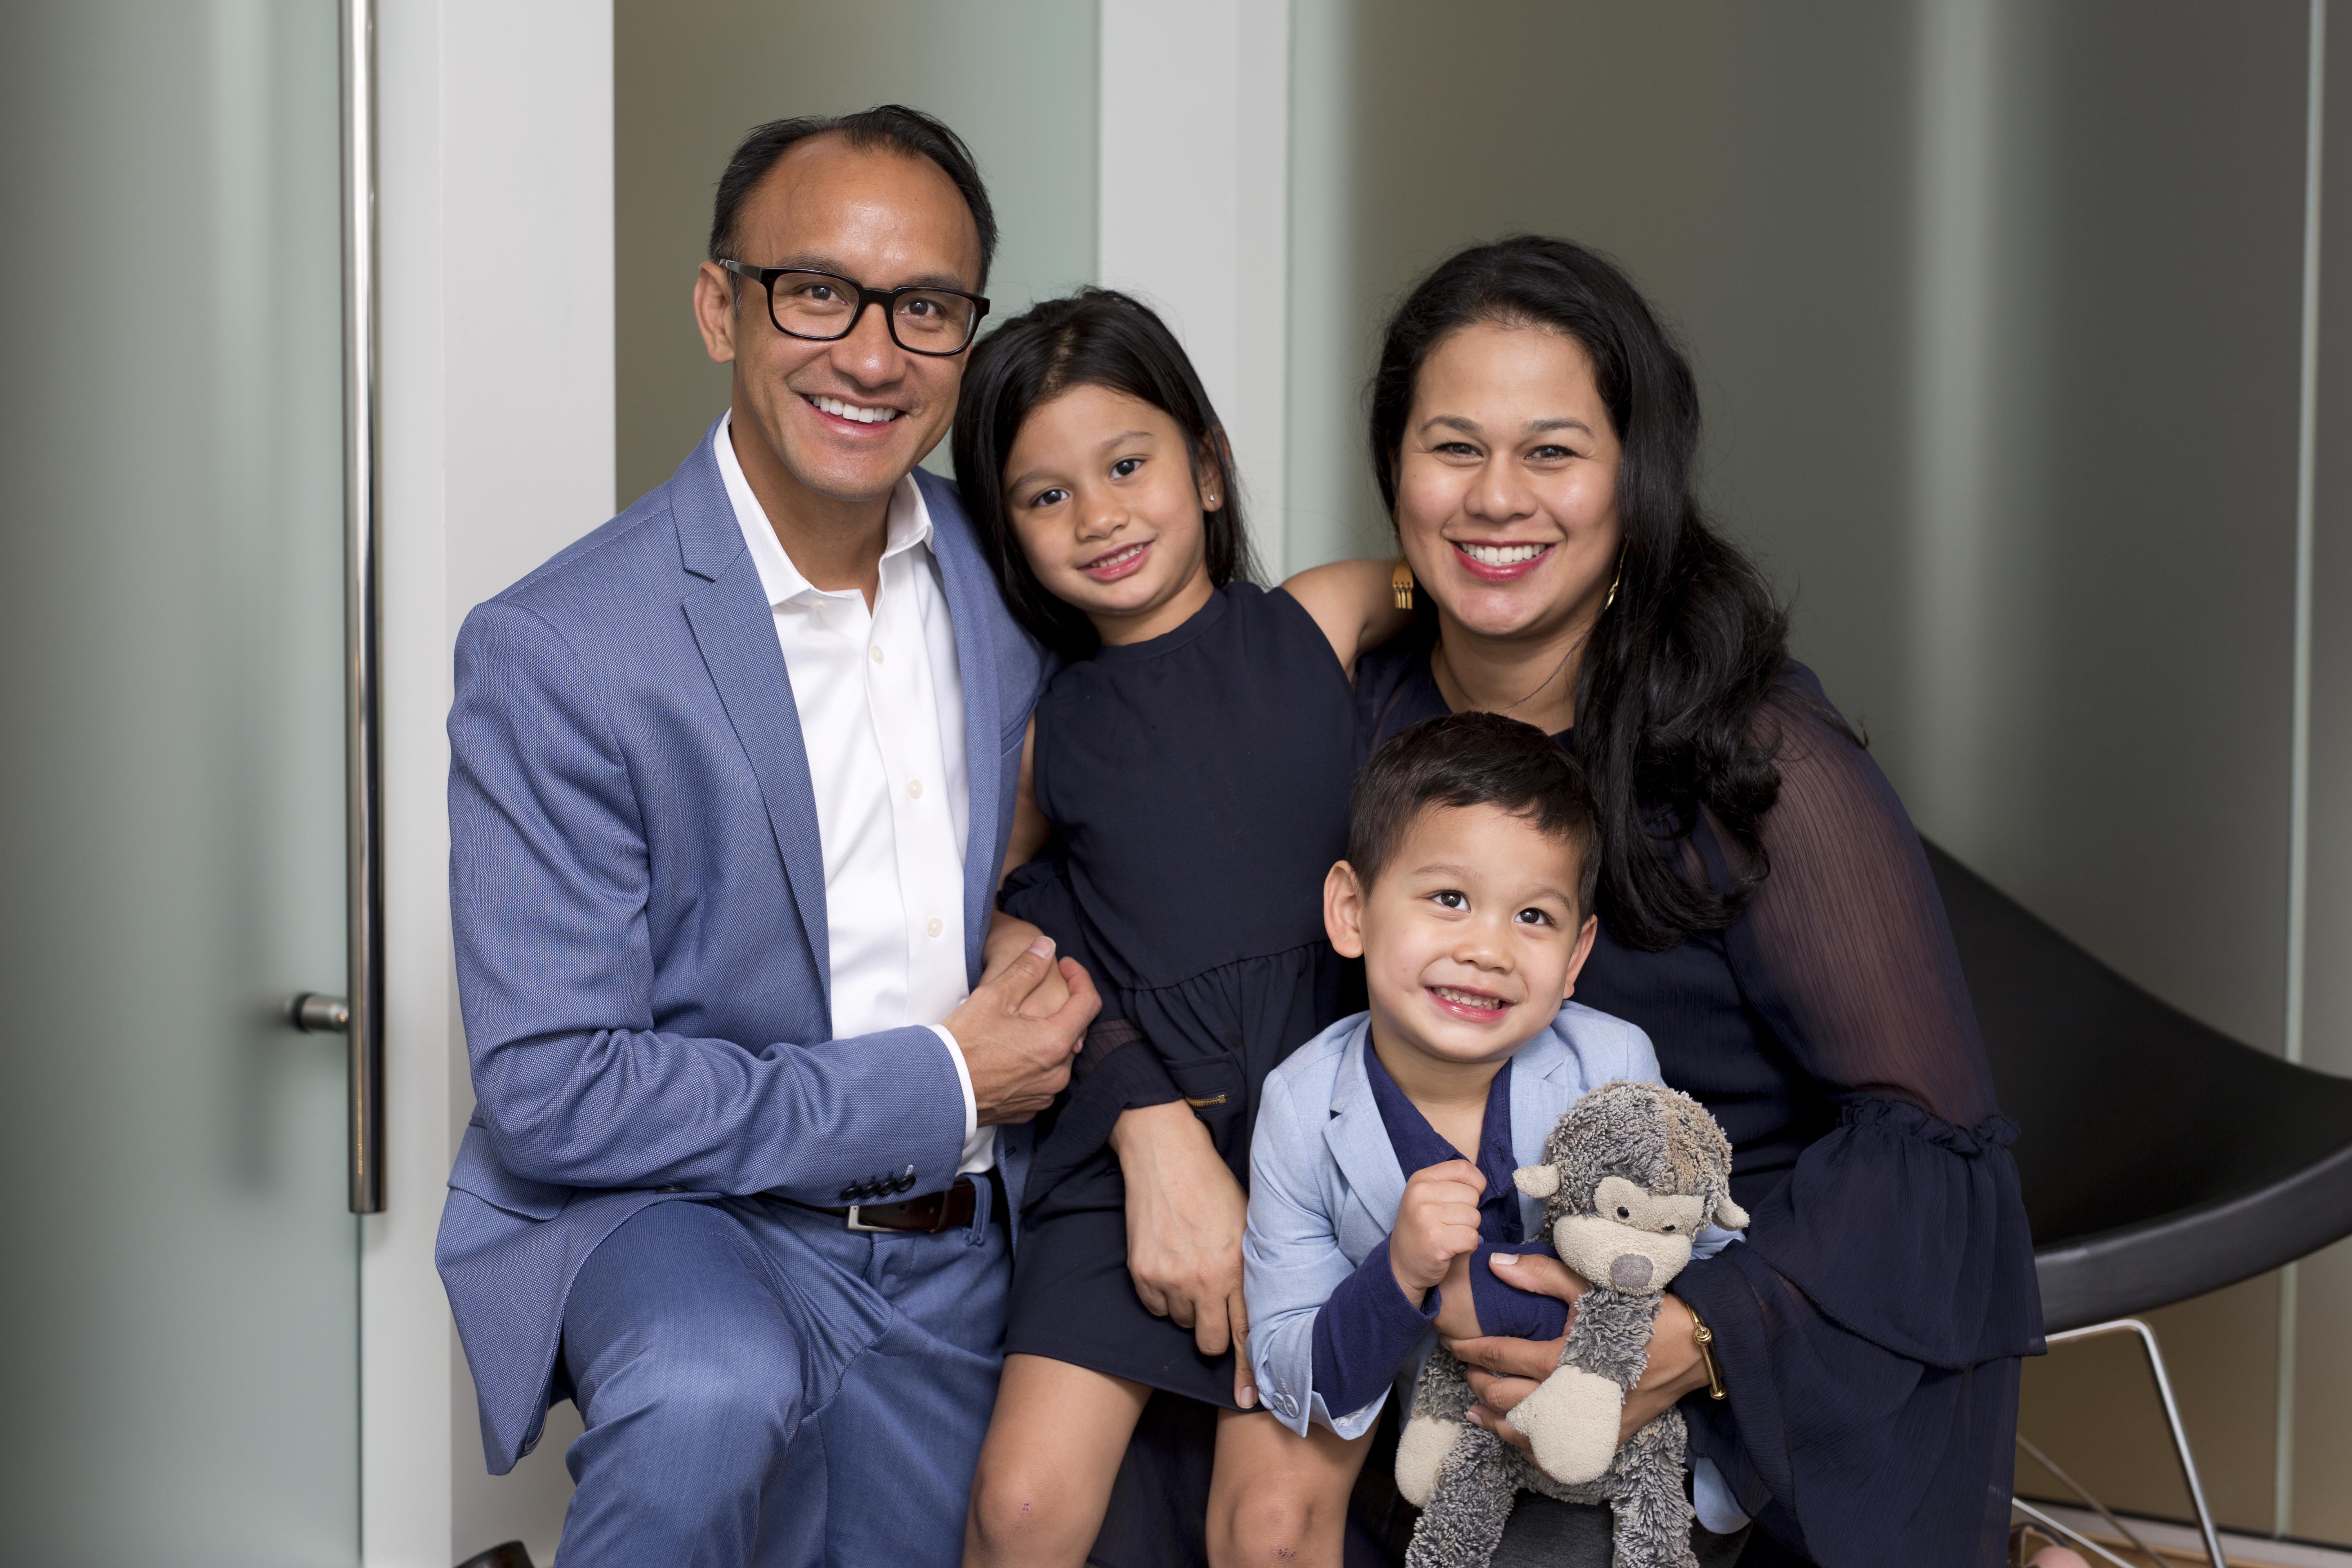 Family photo of Dr. Paguio.